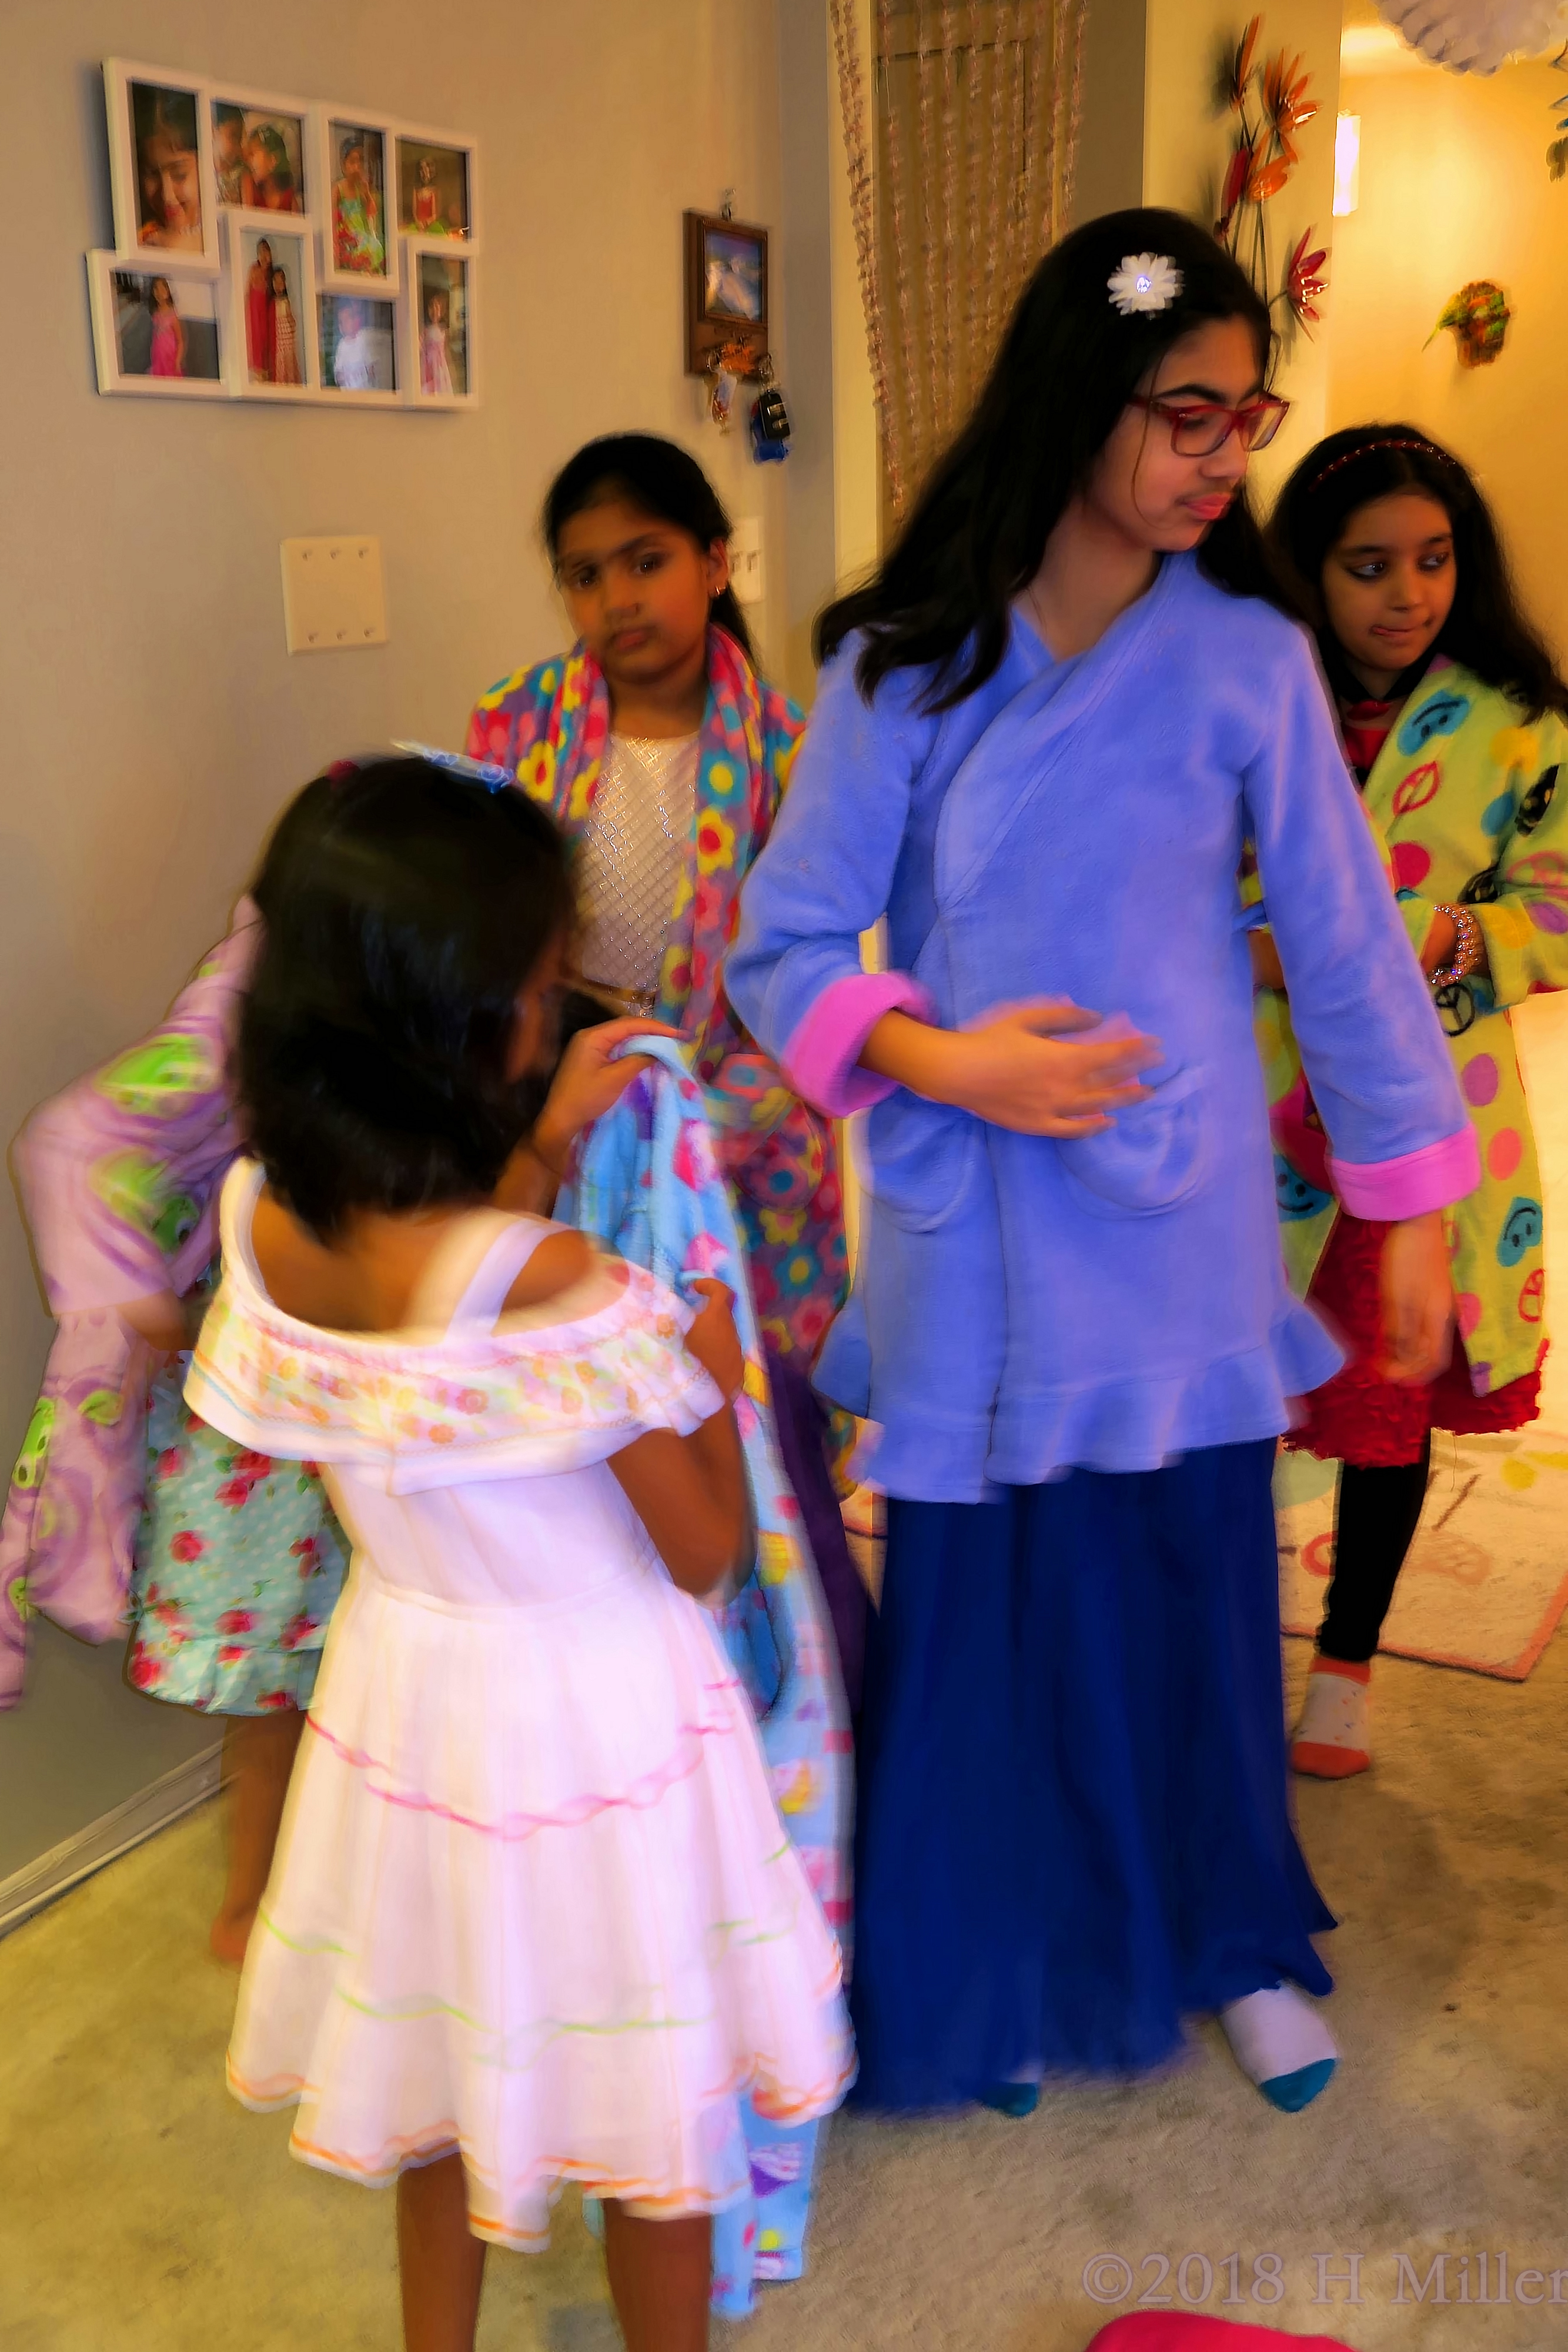 While Trying On Their Colorful Spa Robes! 4